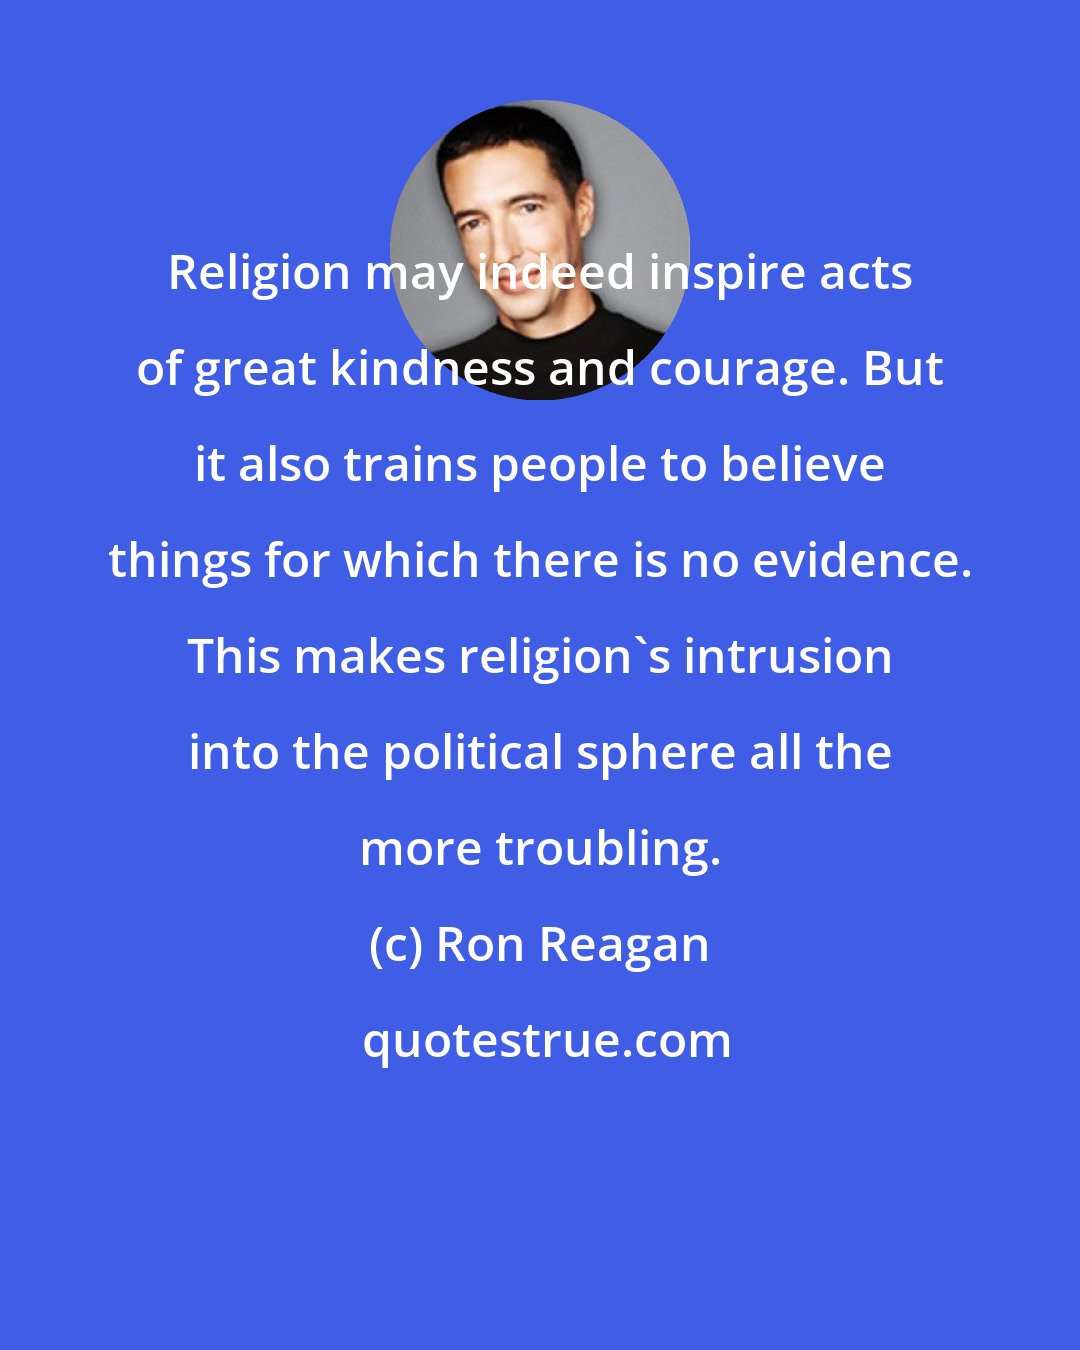 Ron Reagan: Religion may indeed inspire acts of great kindness and courage. But it also trains people to believe things for which there is no evidence. This makes religion's intrusion into the political sphere all the more troubling.